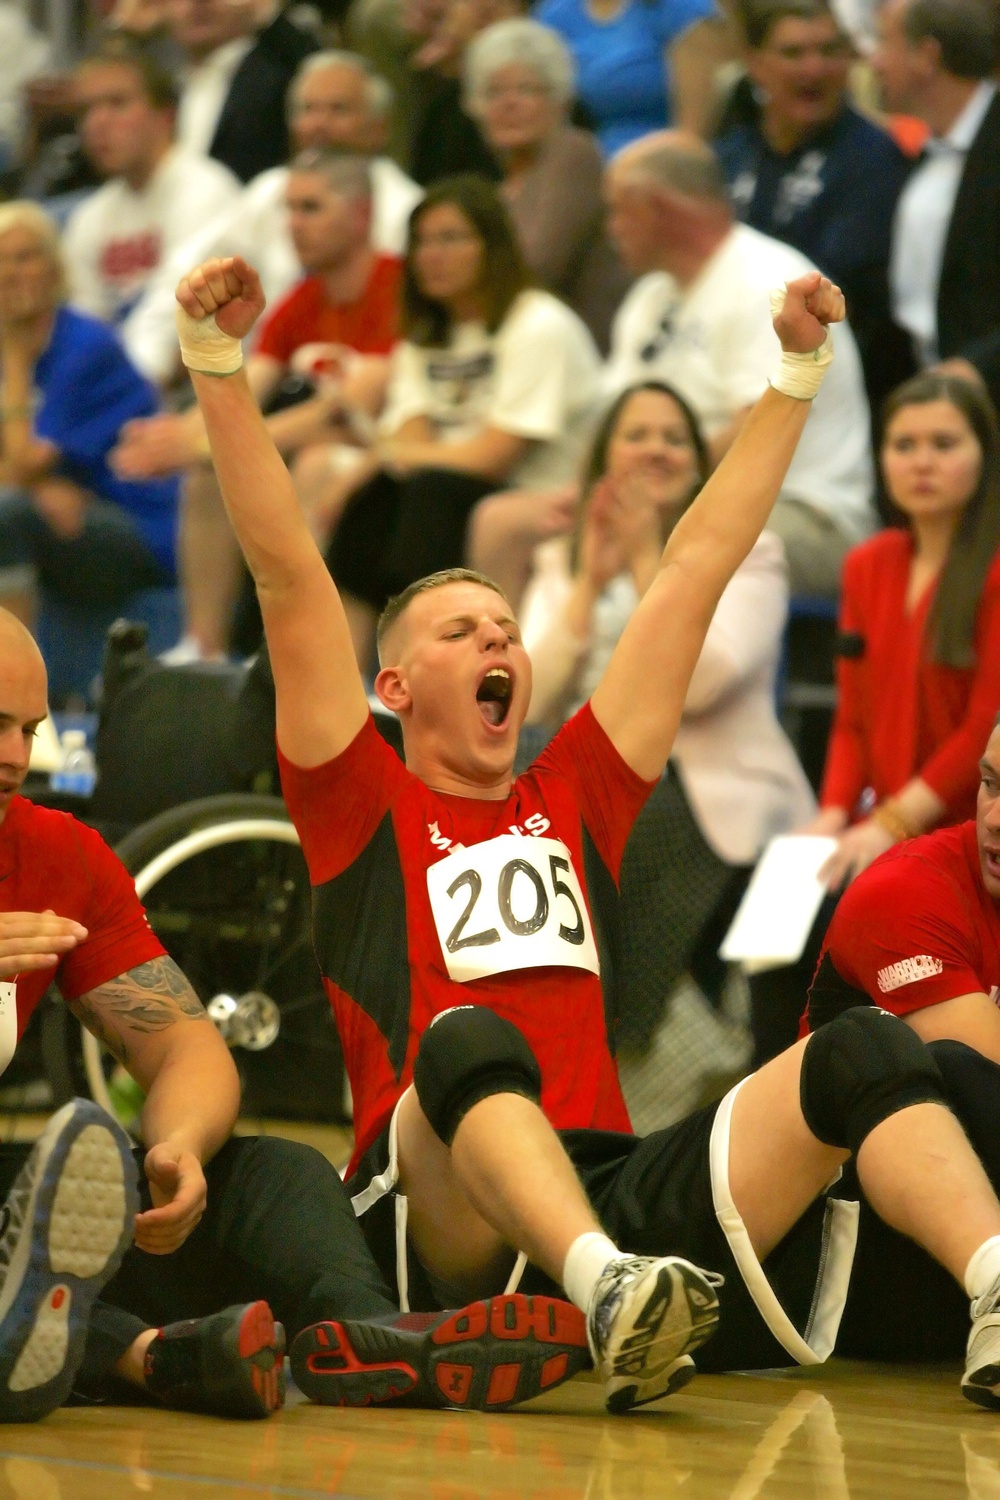 Palmer, Mass., Marine competes in sitting volleyball